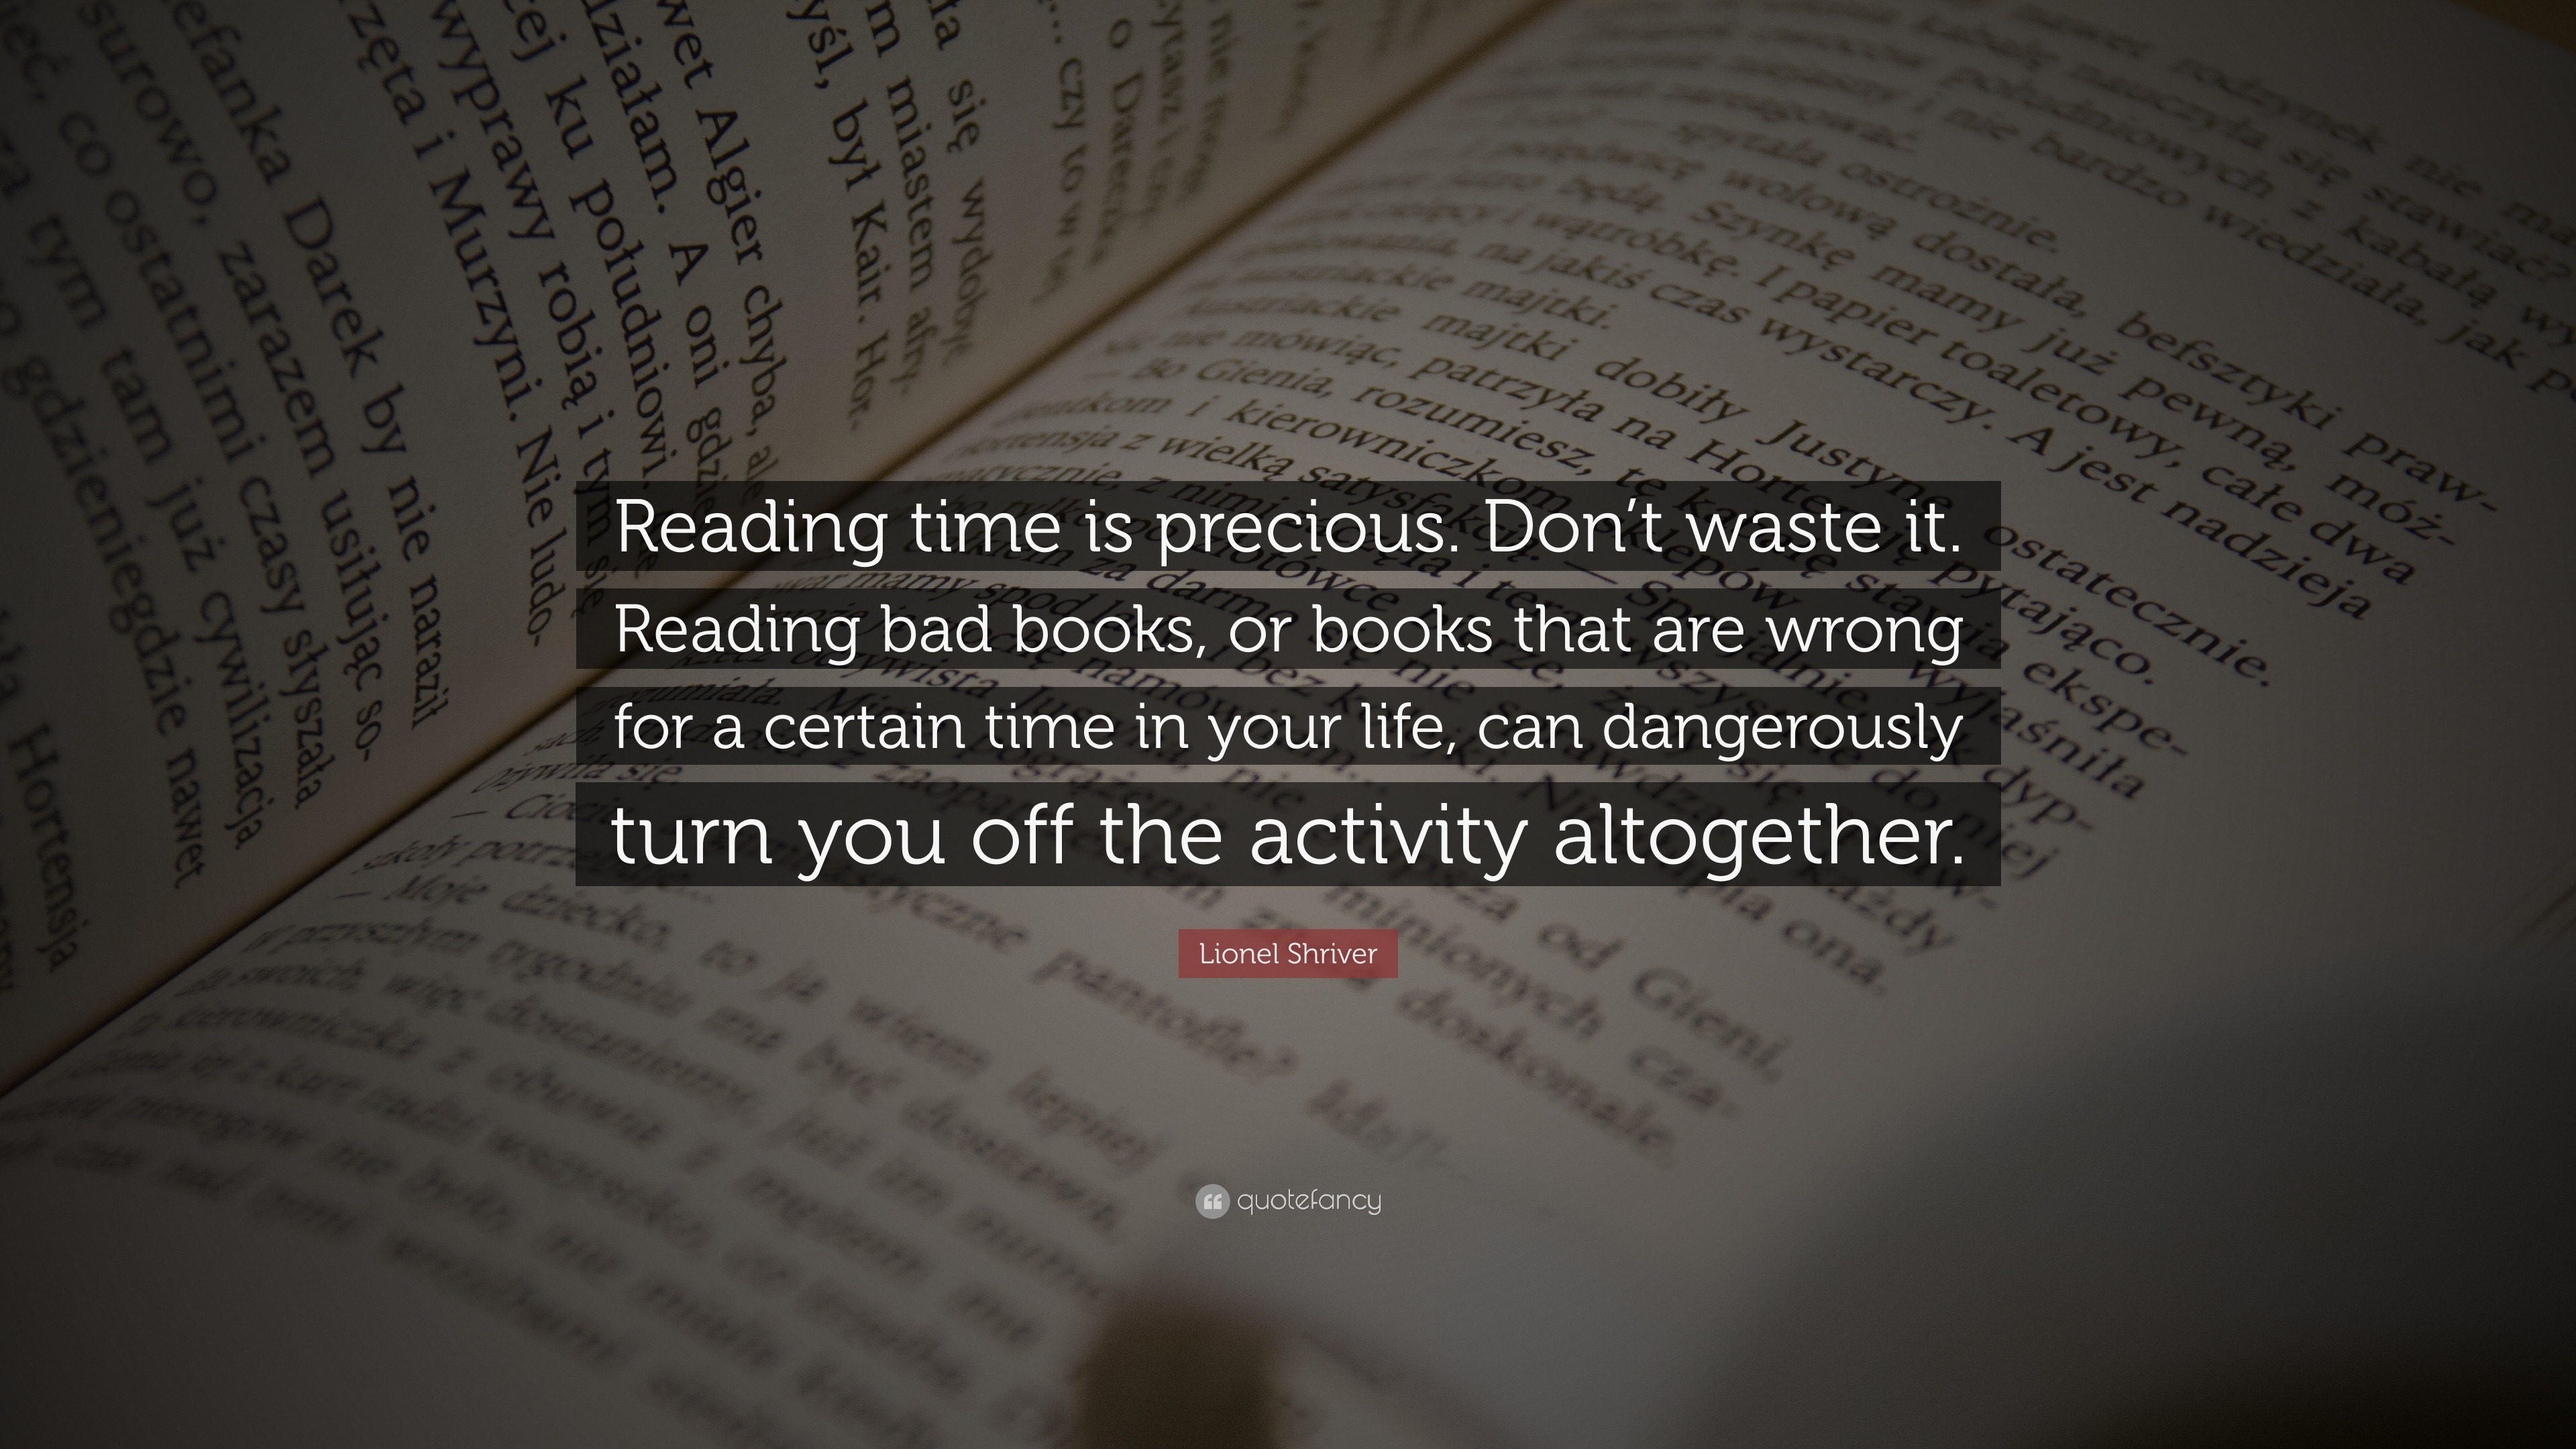 Lionel Shriver Quote “Reading time is precious Don t waste it